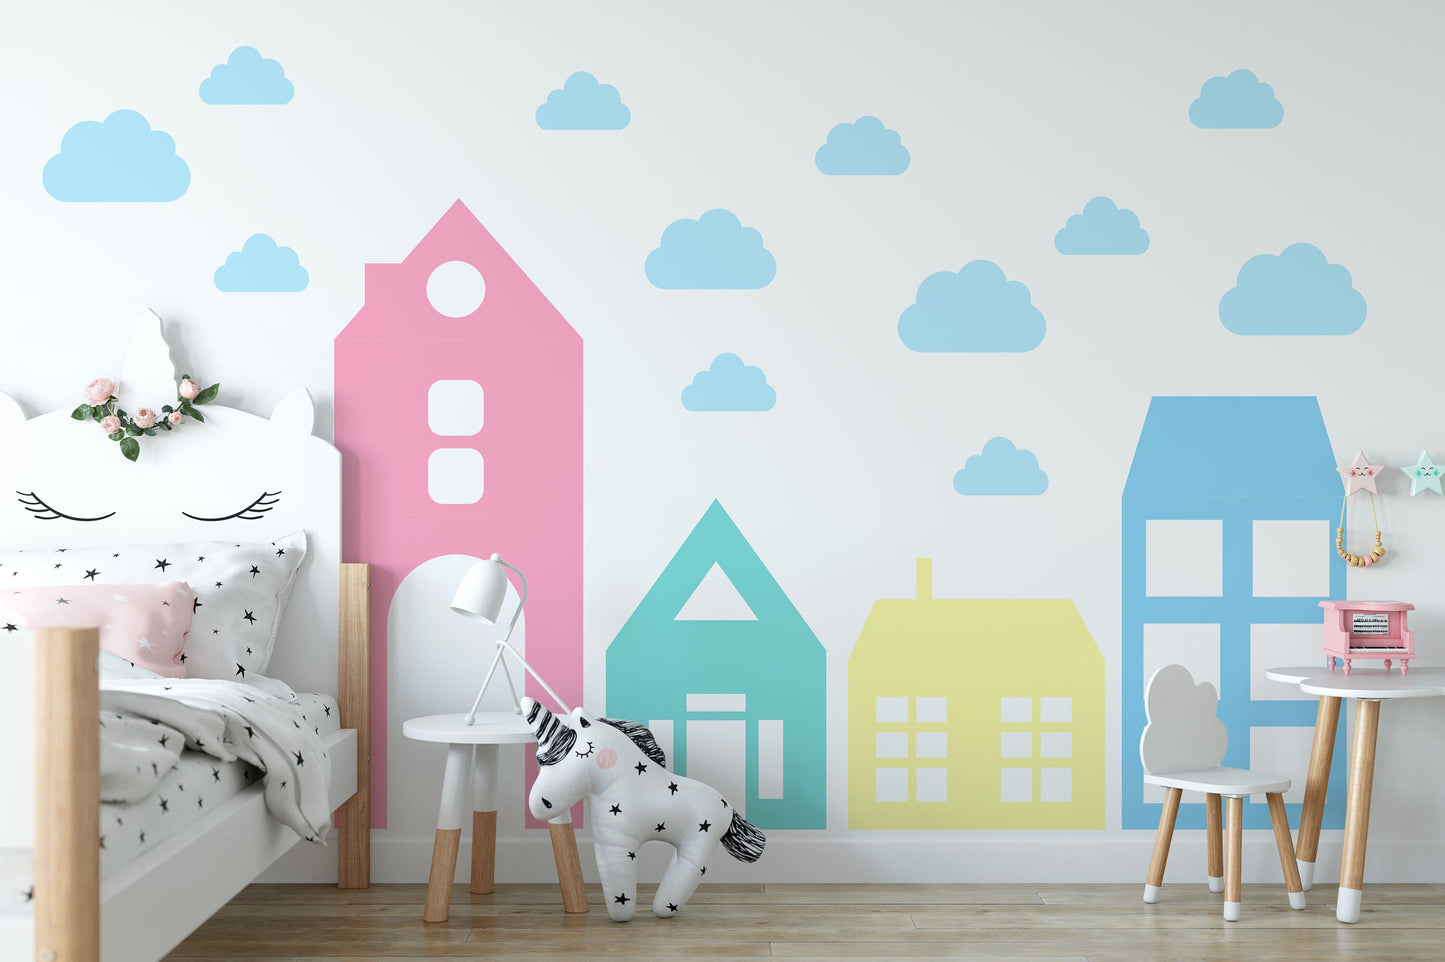 Big House Wall Decal Large Home Headboard Color Block City Stickers, LF293